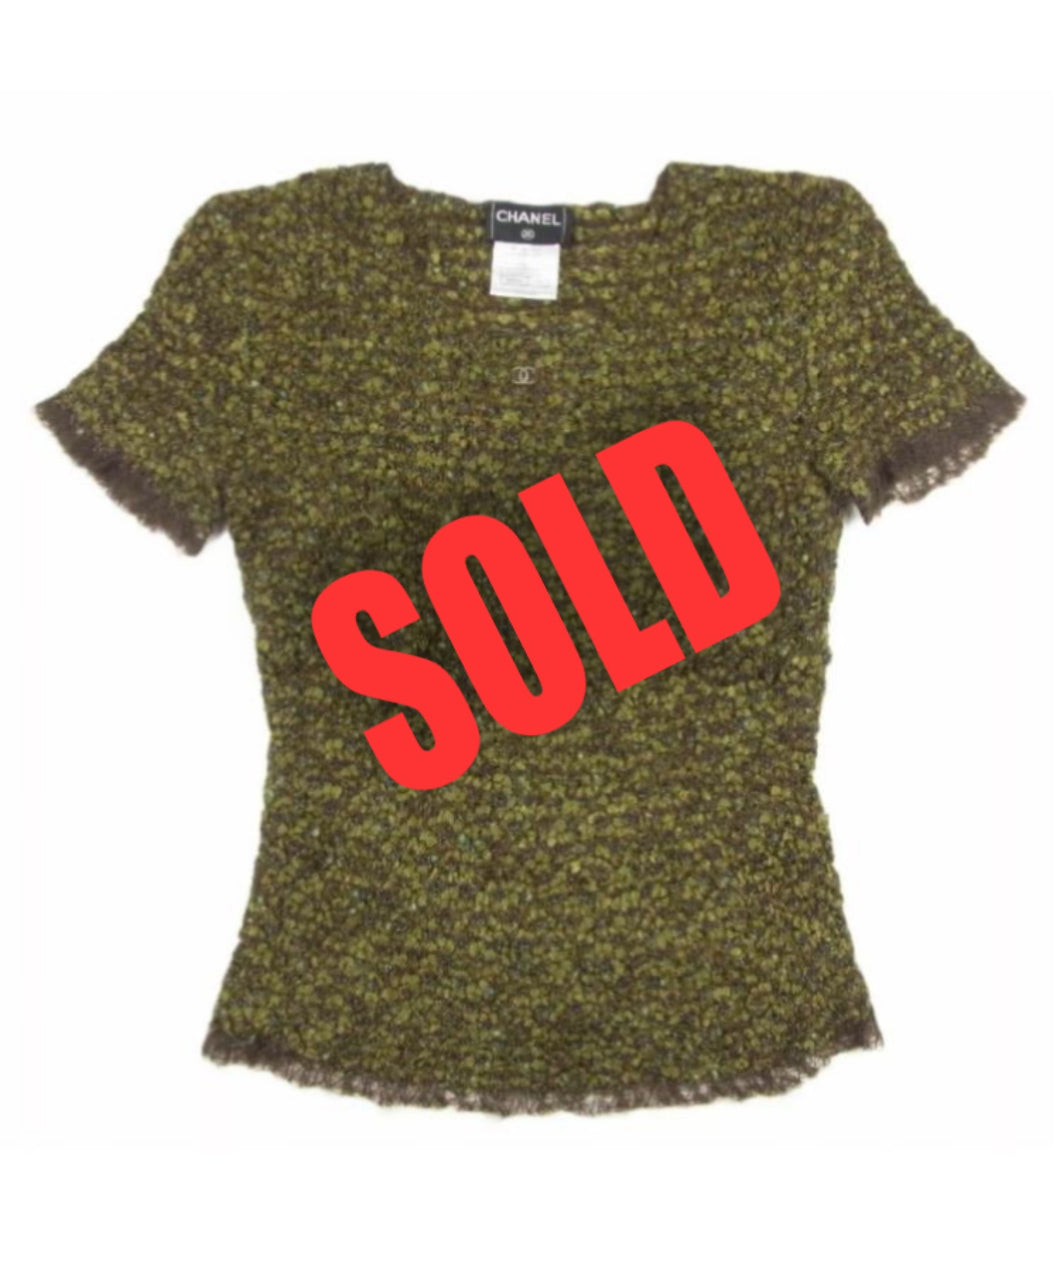 Vintage Chanel 98A, 1998 Fall tweed wool pullover short sleeve olive mohair sweater top blouse FR 42 US 6/8/10